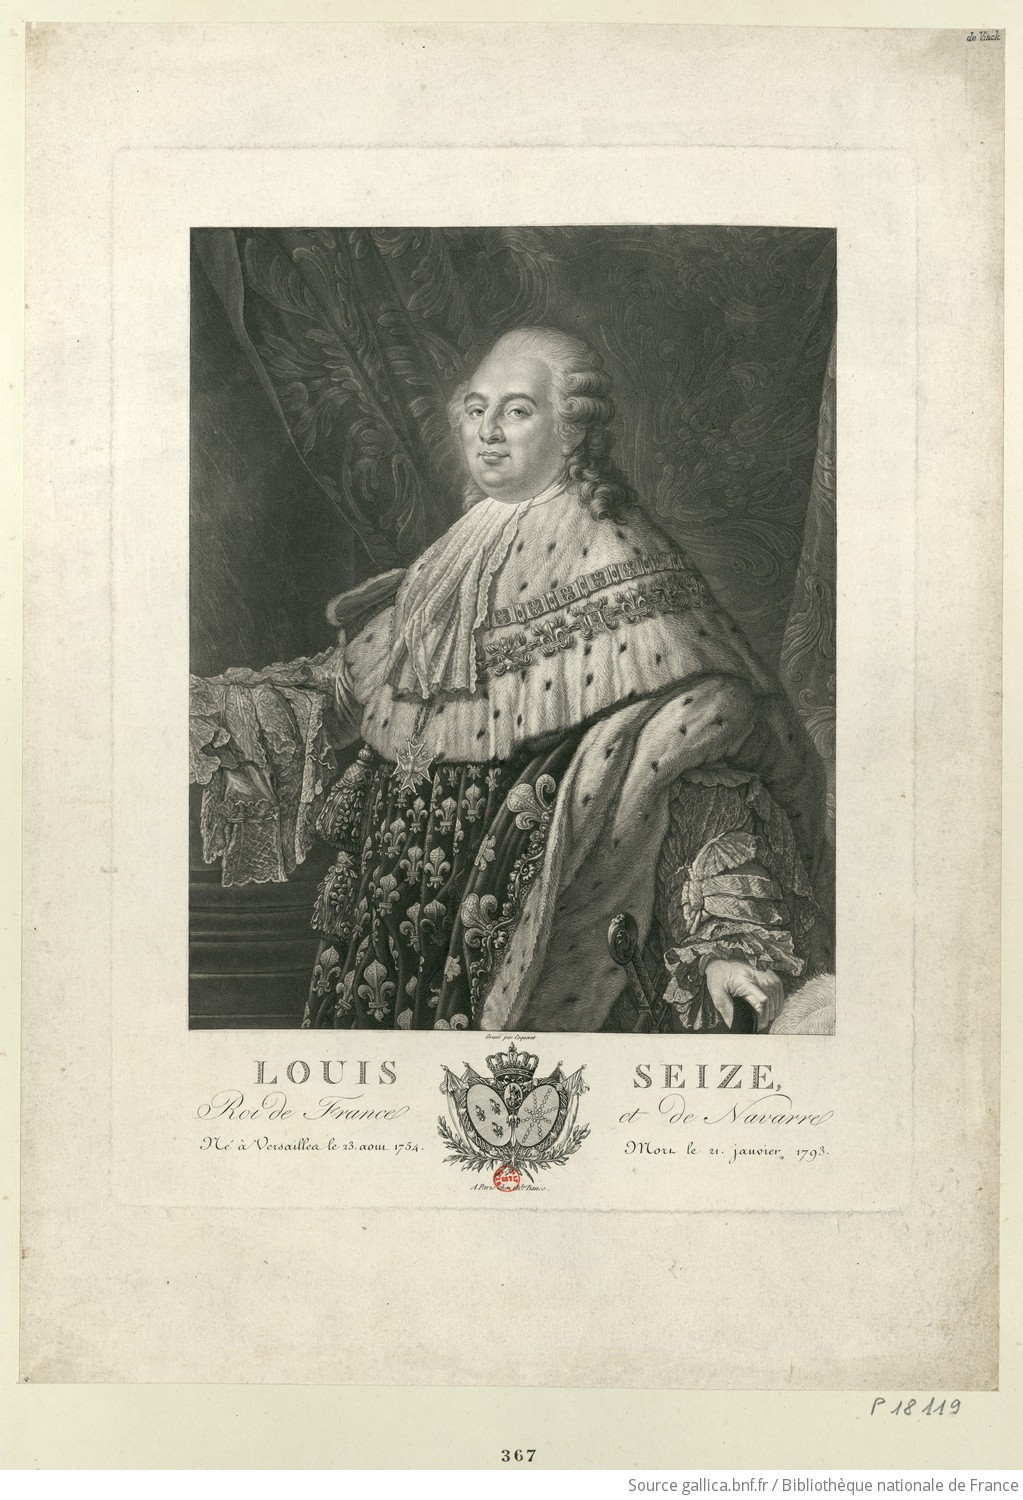 Check Out What Louis XVI Looked Like  in 1793 